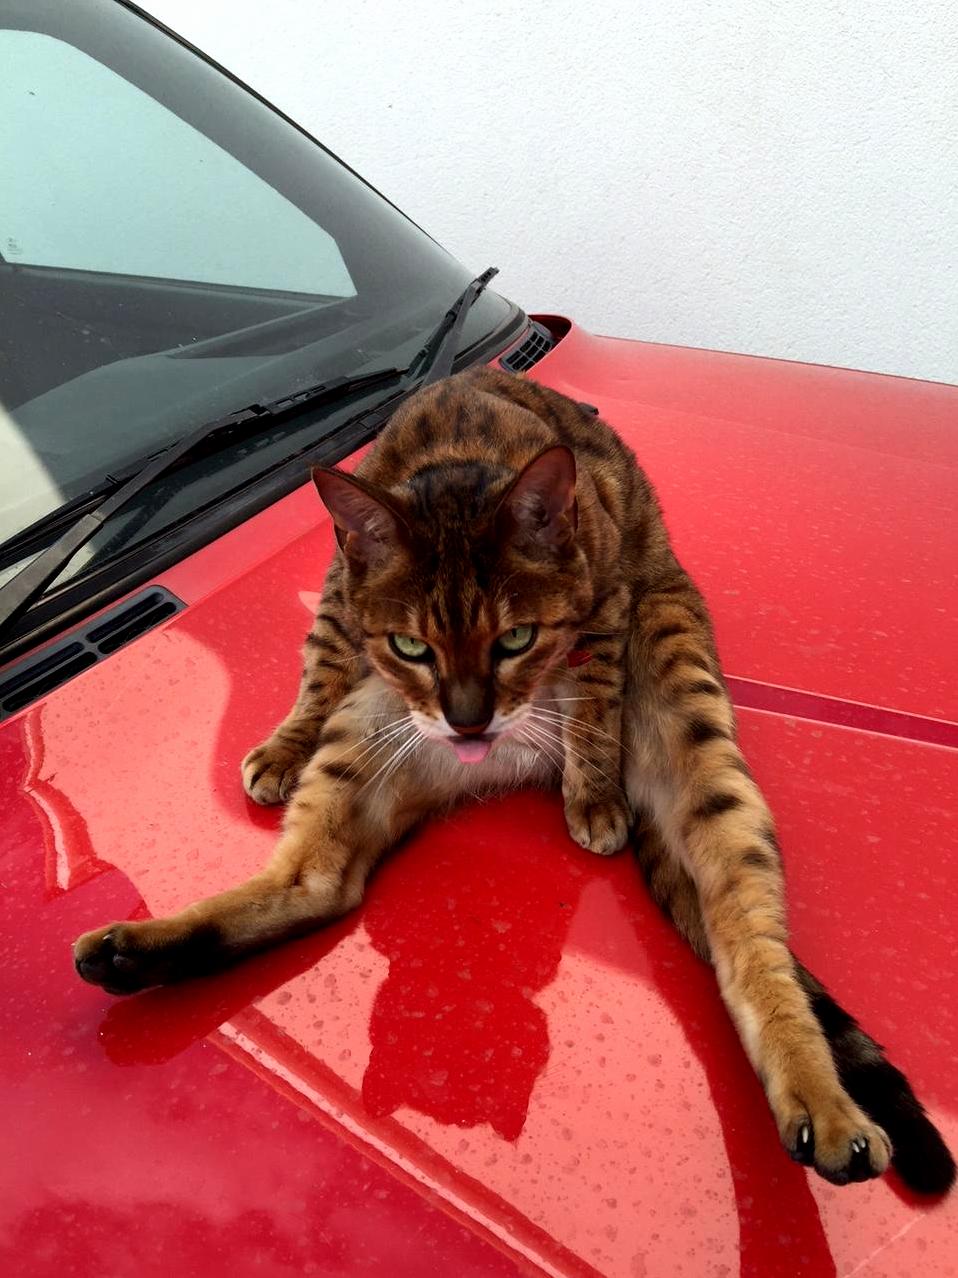 My boss interrupted this cat cleaning itself on his car…